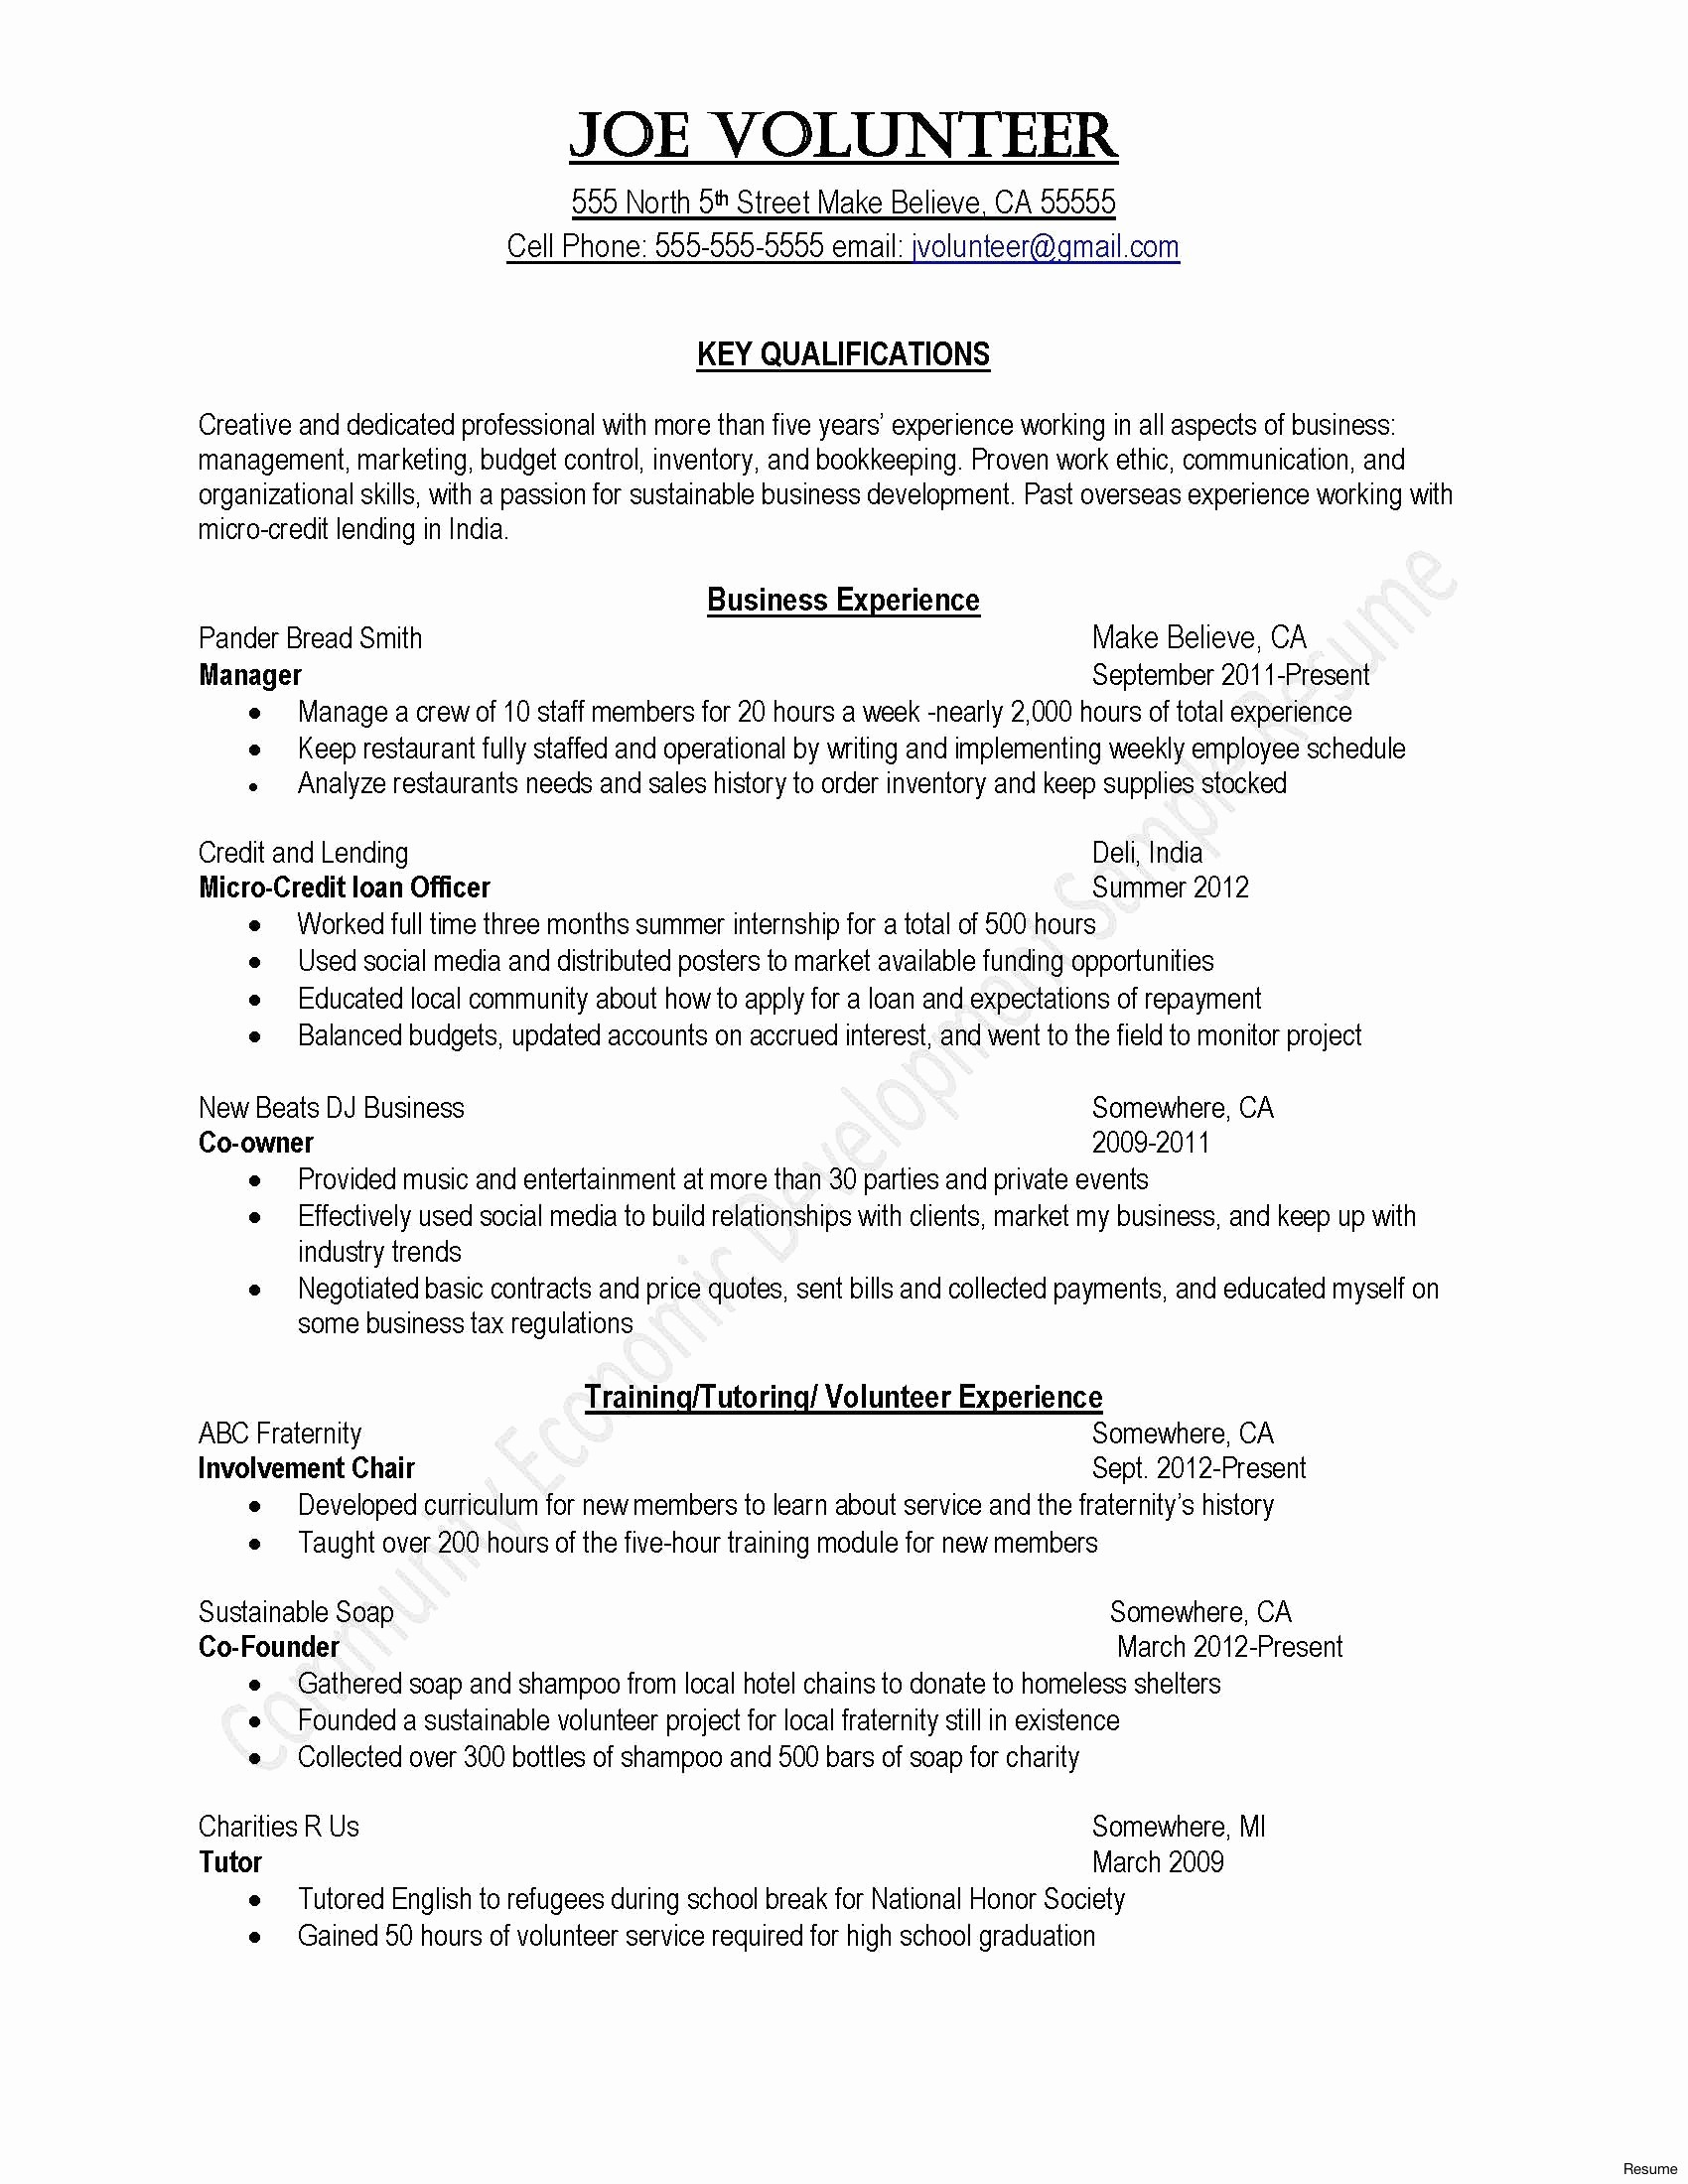 Grant Cover Letter Template - Application for Funding Letter Template Elegant Cover Letter